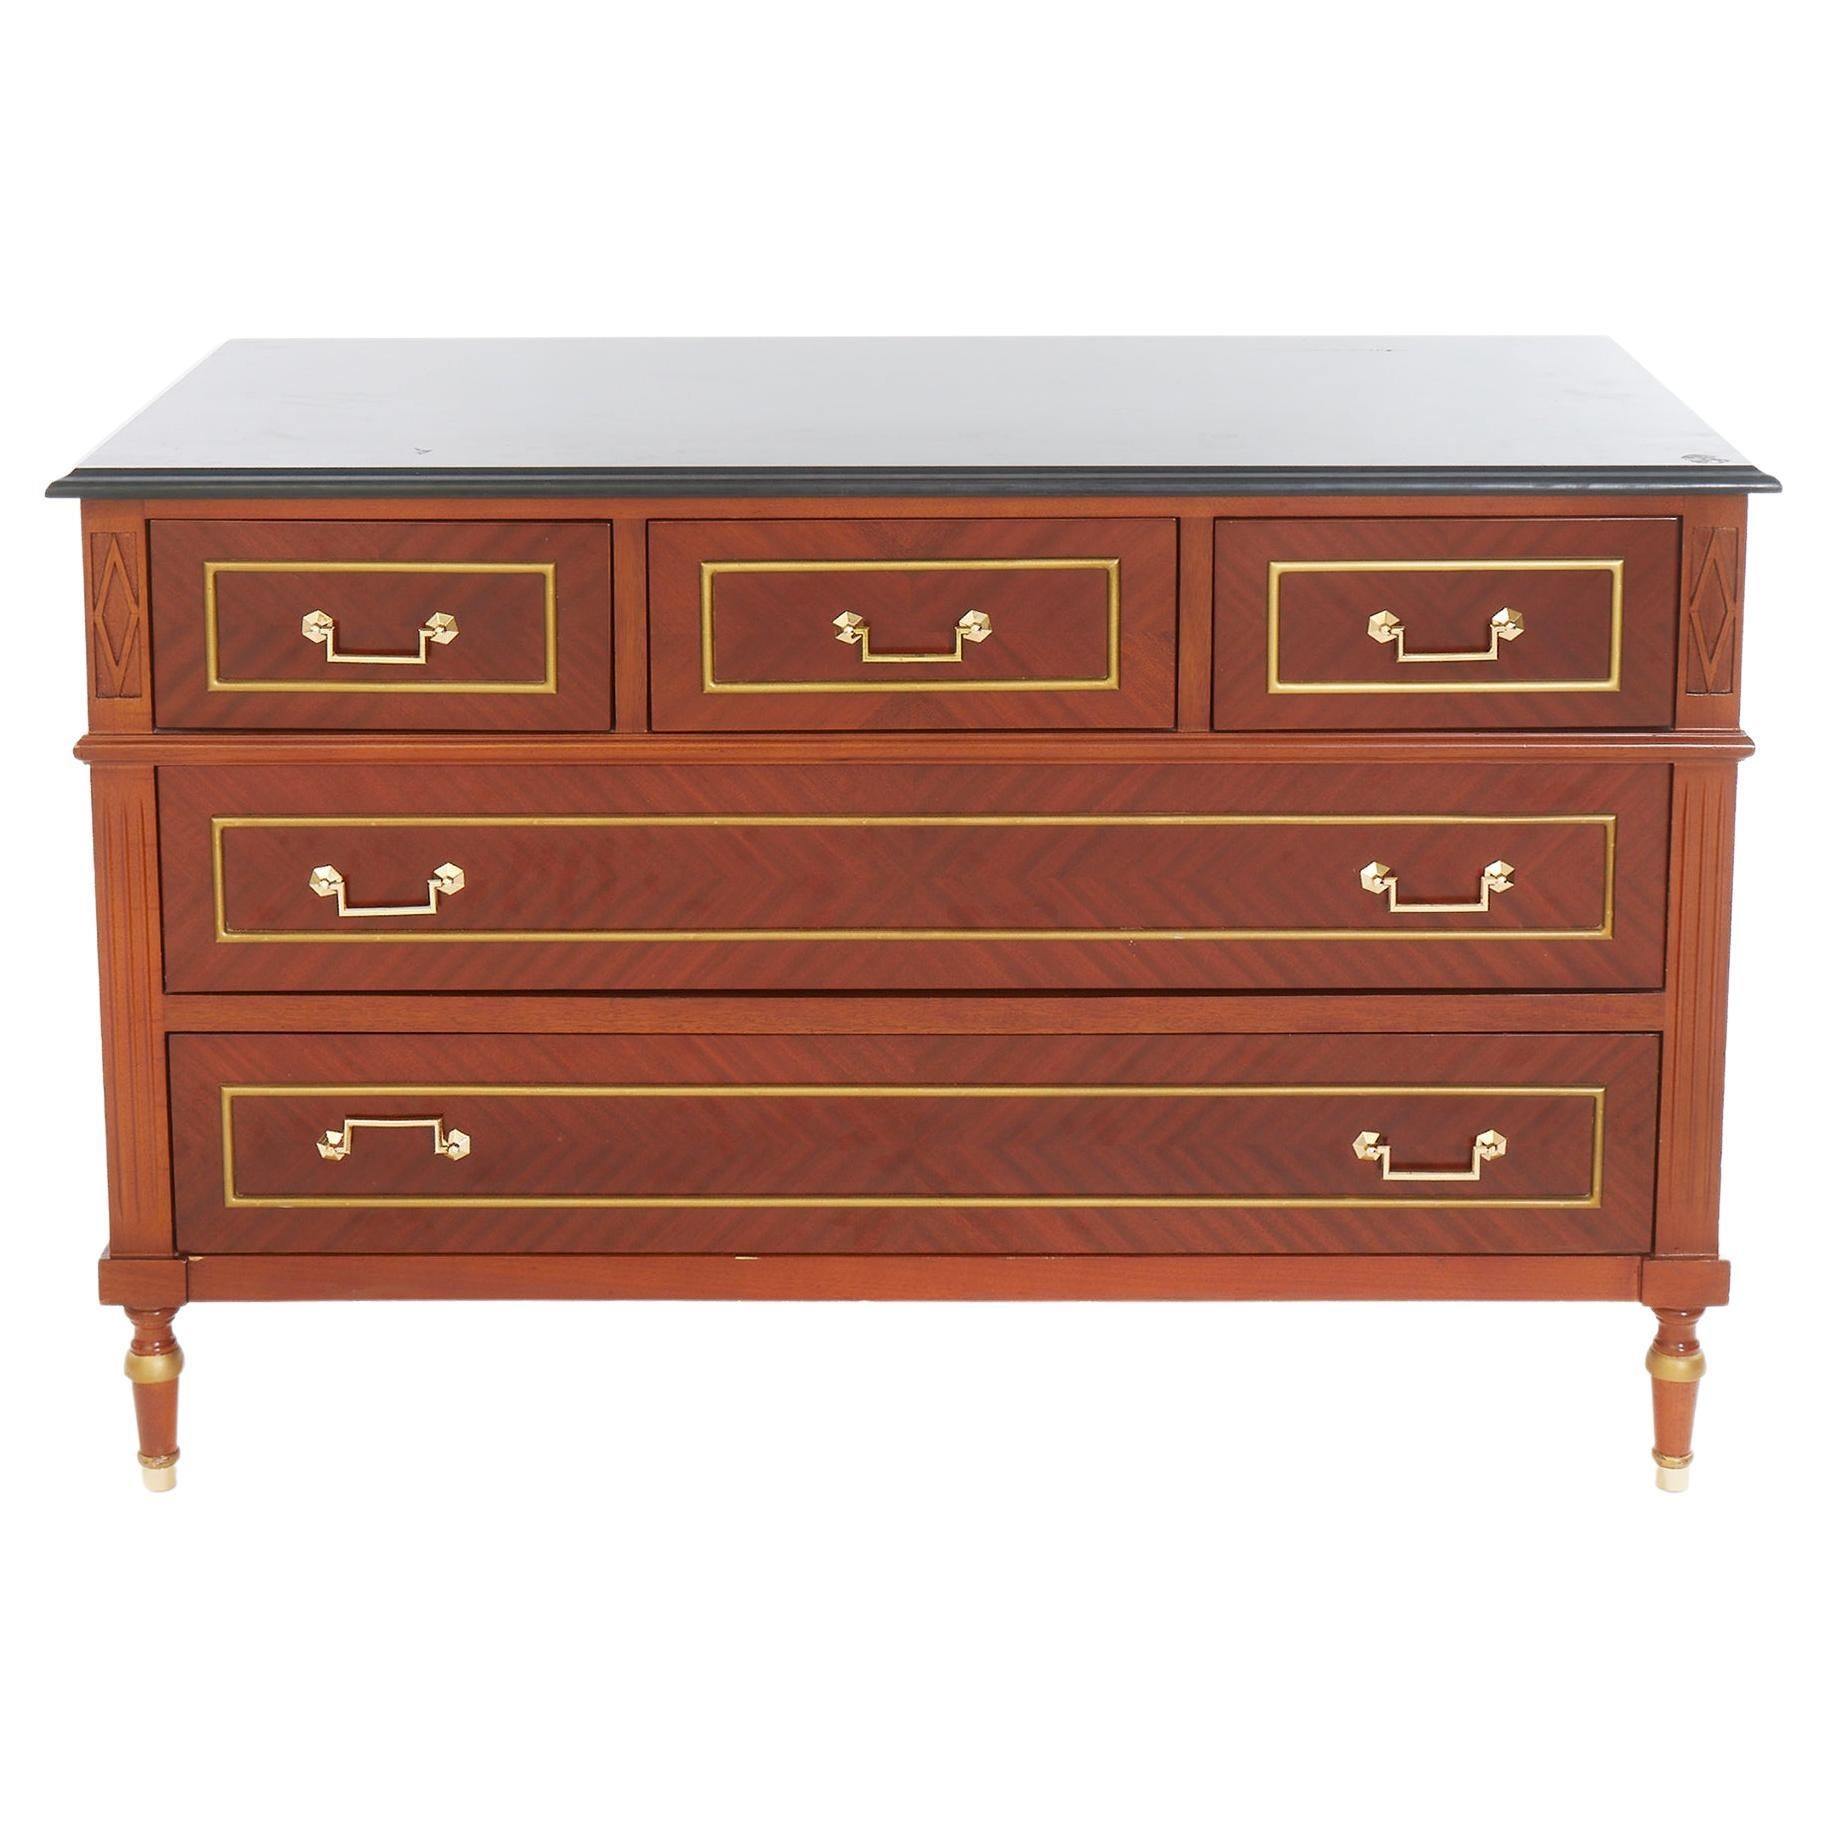 Mahogany Wood / Marble Top / Drawer Chest